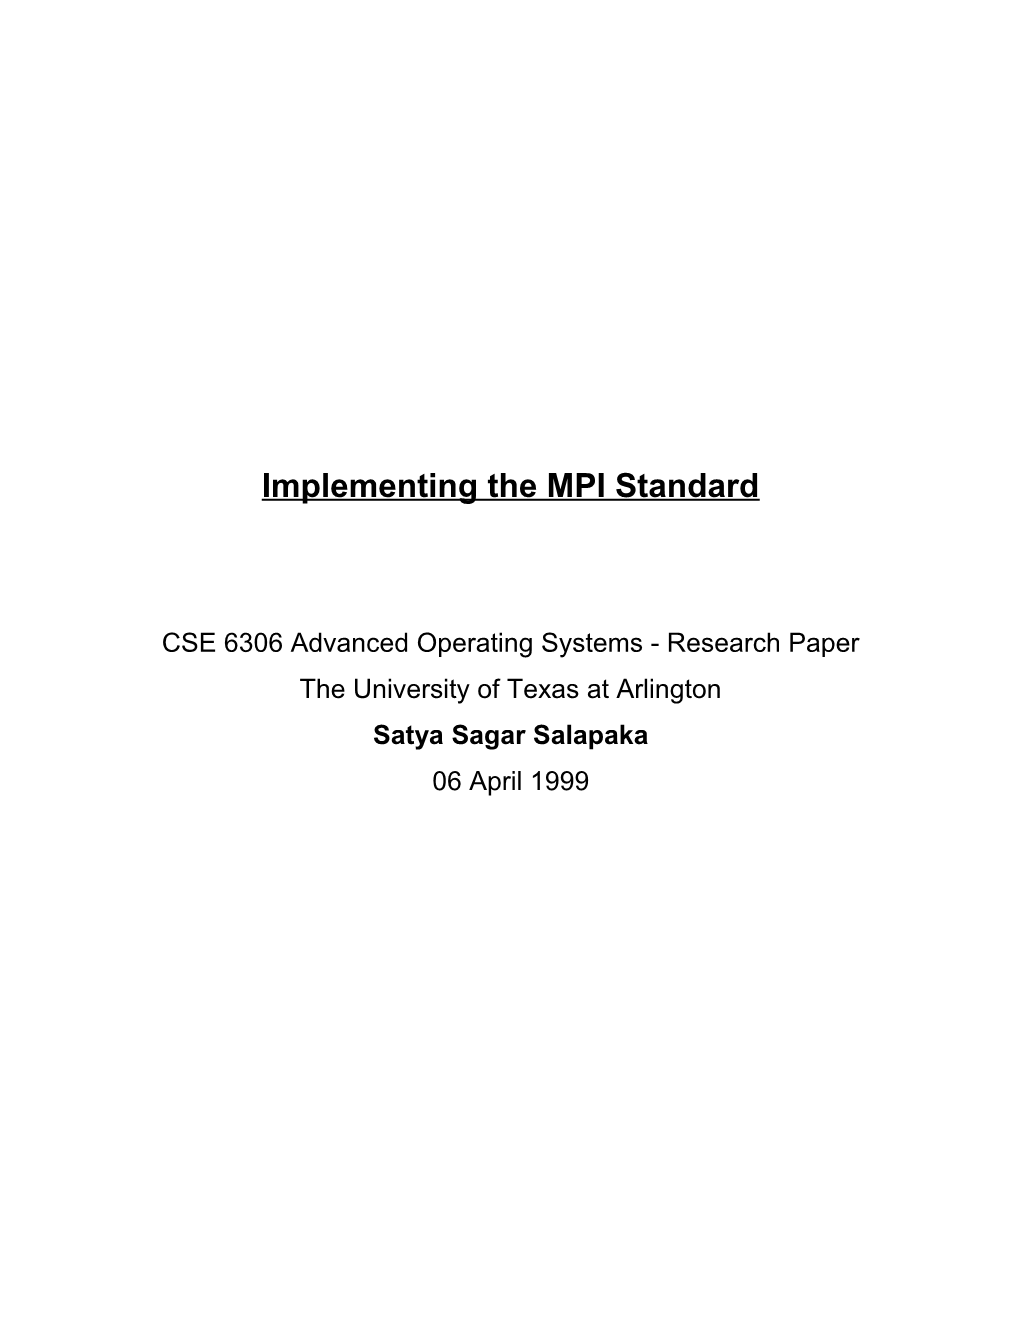 Mapping MPI to Machine: Implementing the MPI Standard